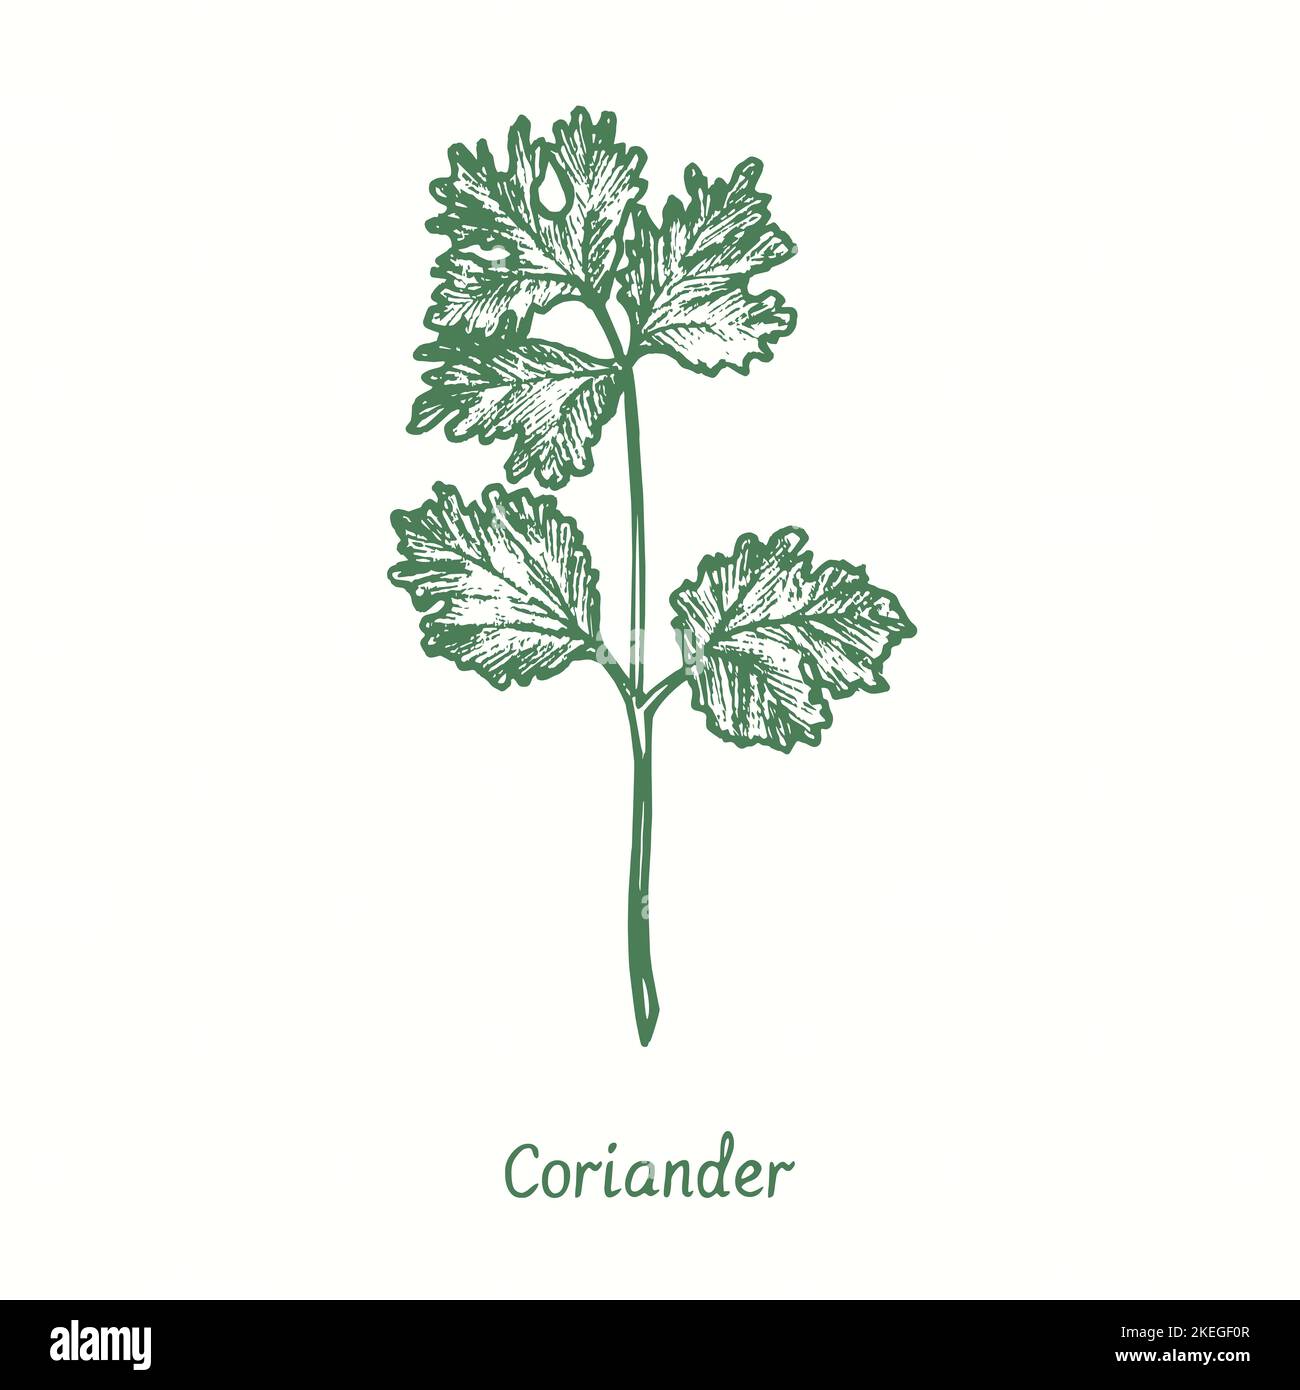 Coriander leaf.  Ink black and white doodle drawing in woodcut style Stock Photo